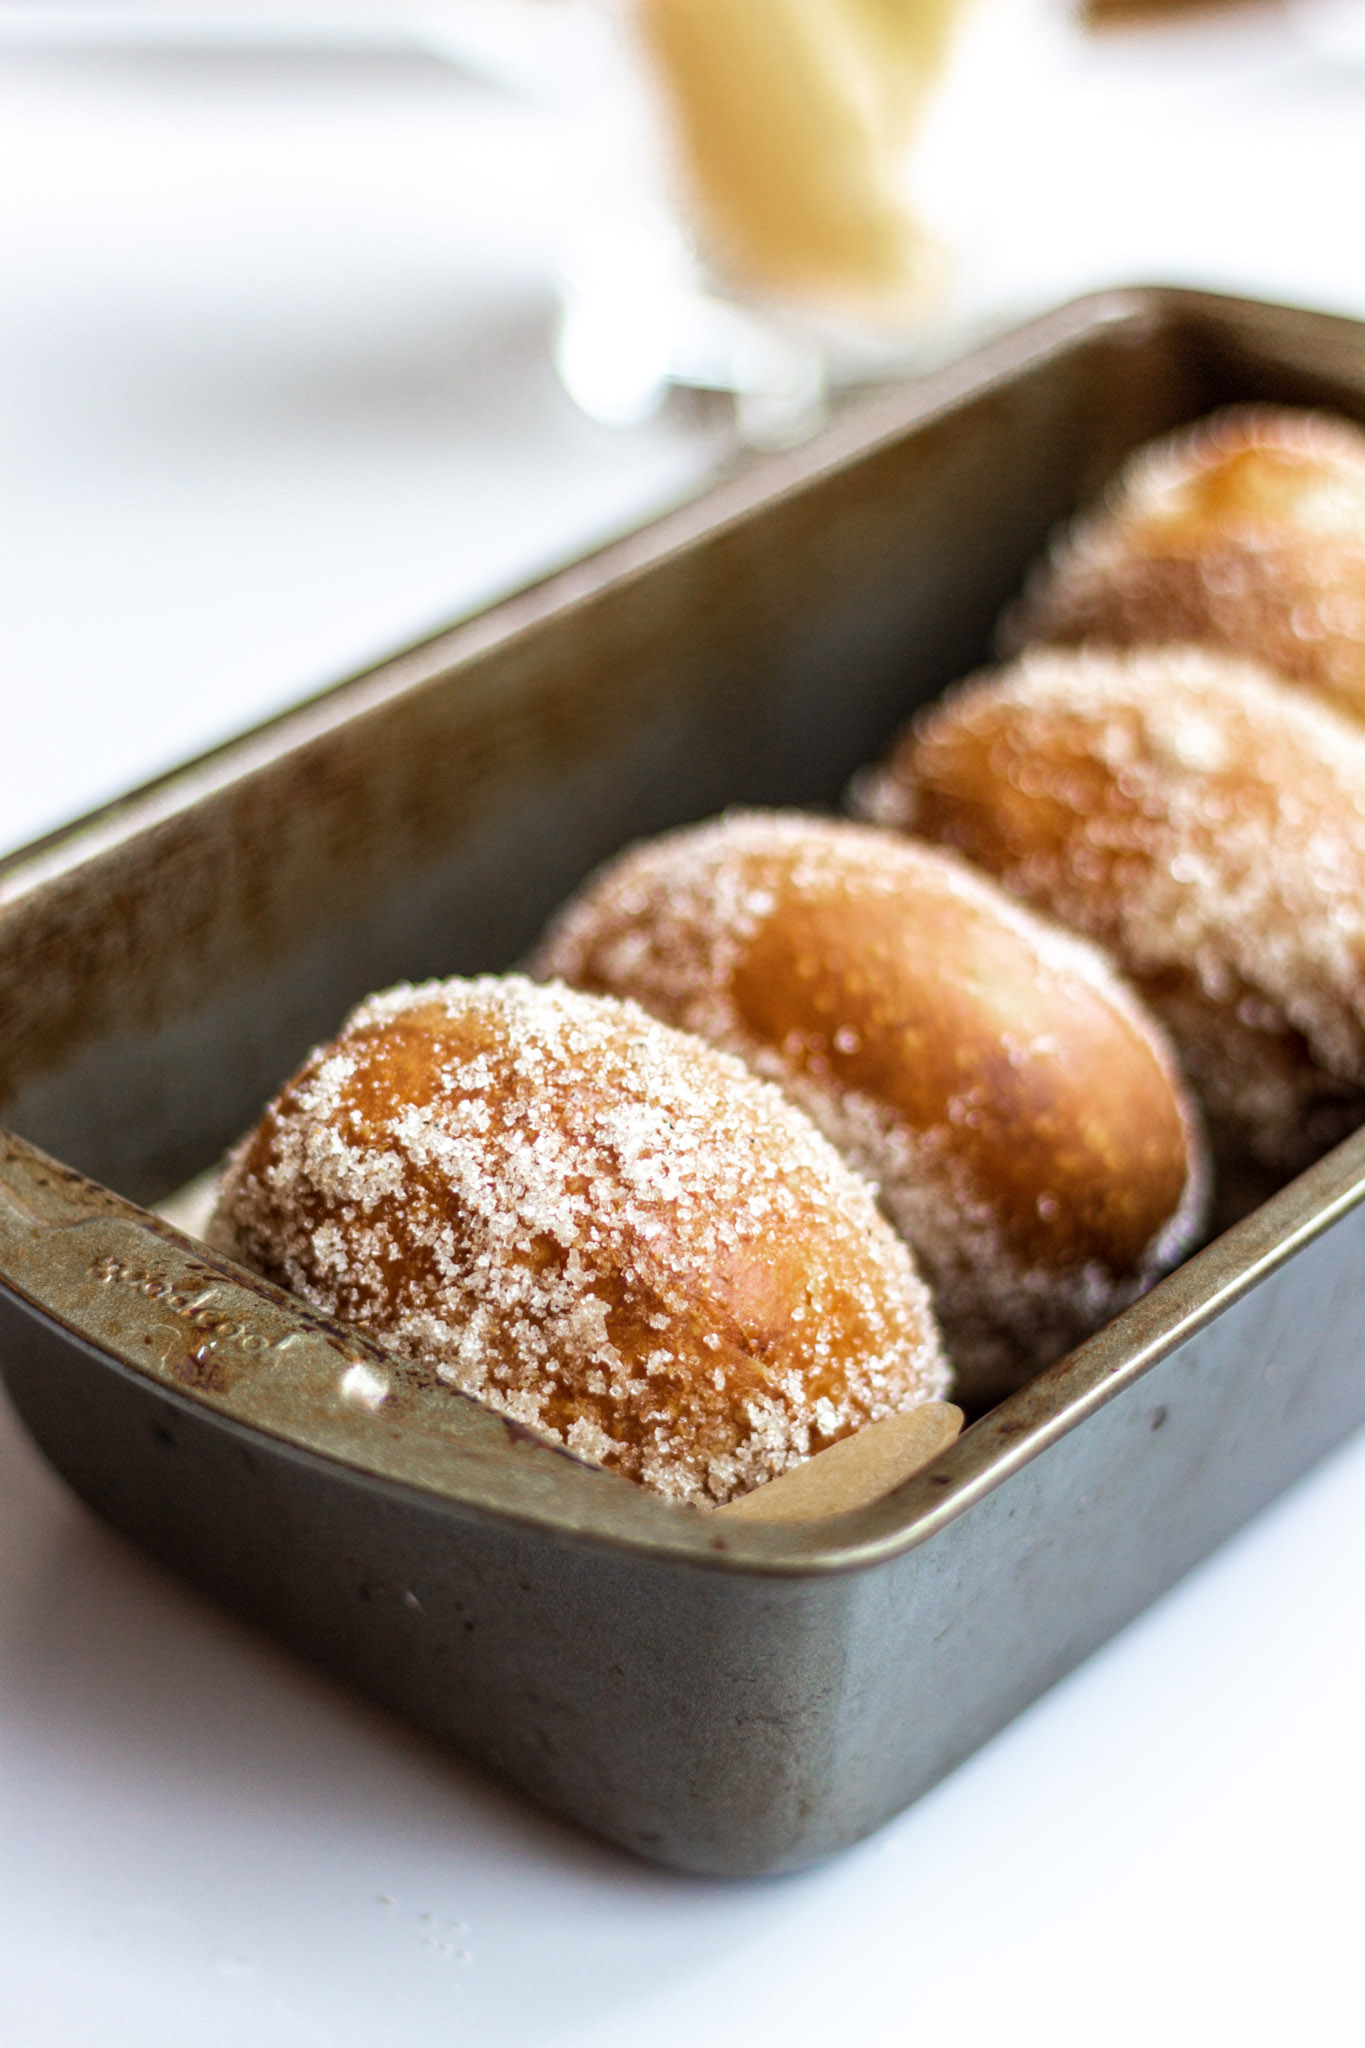 4 donuts coated in cardamom sugar sitting in a grey loaf pan.